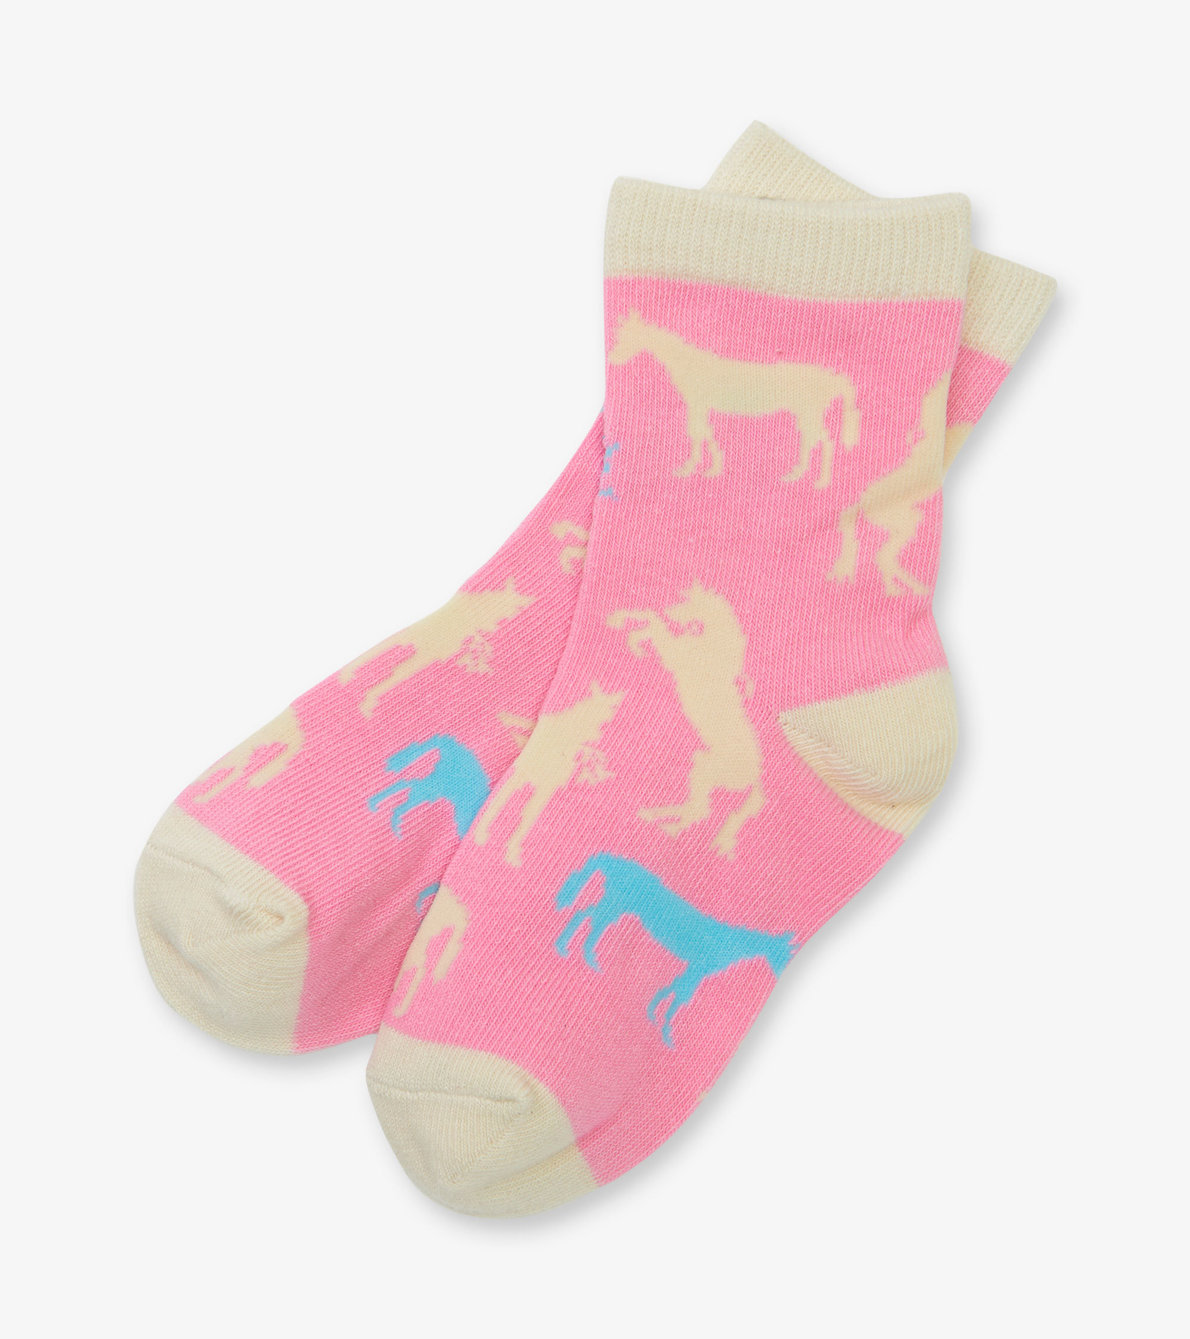 View larger image of Horse Silhouettes Kids Crew Socks